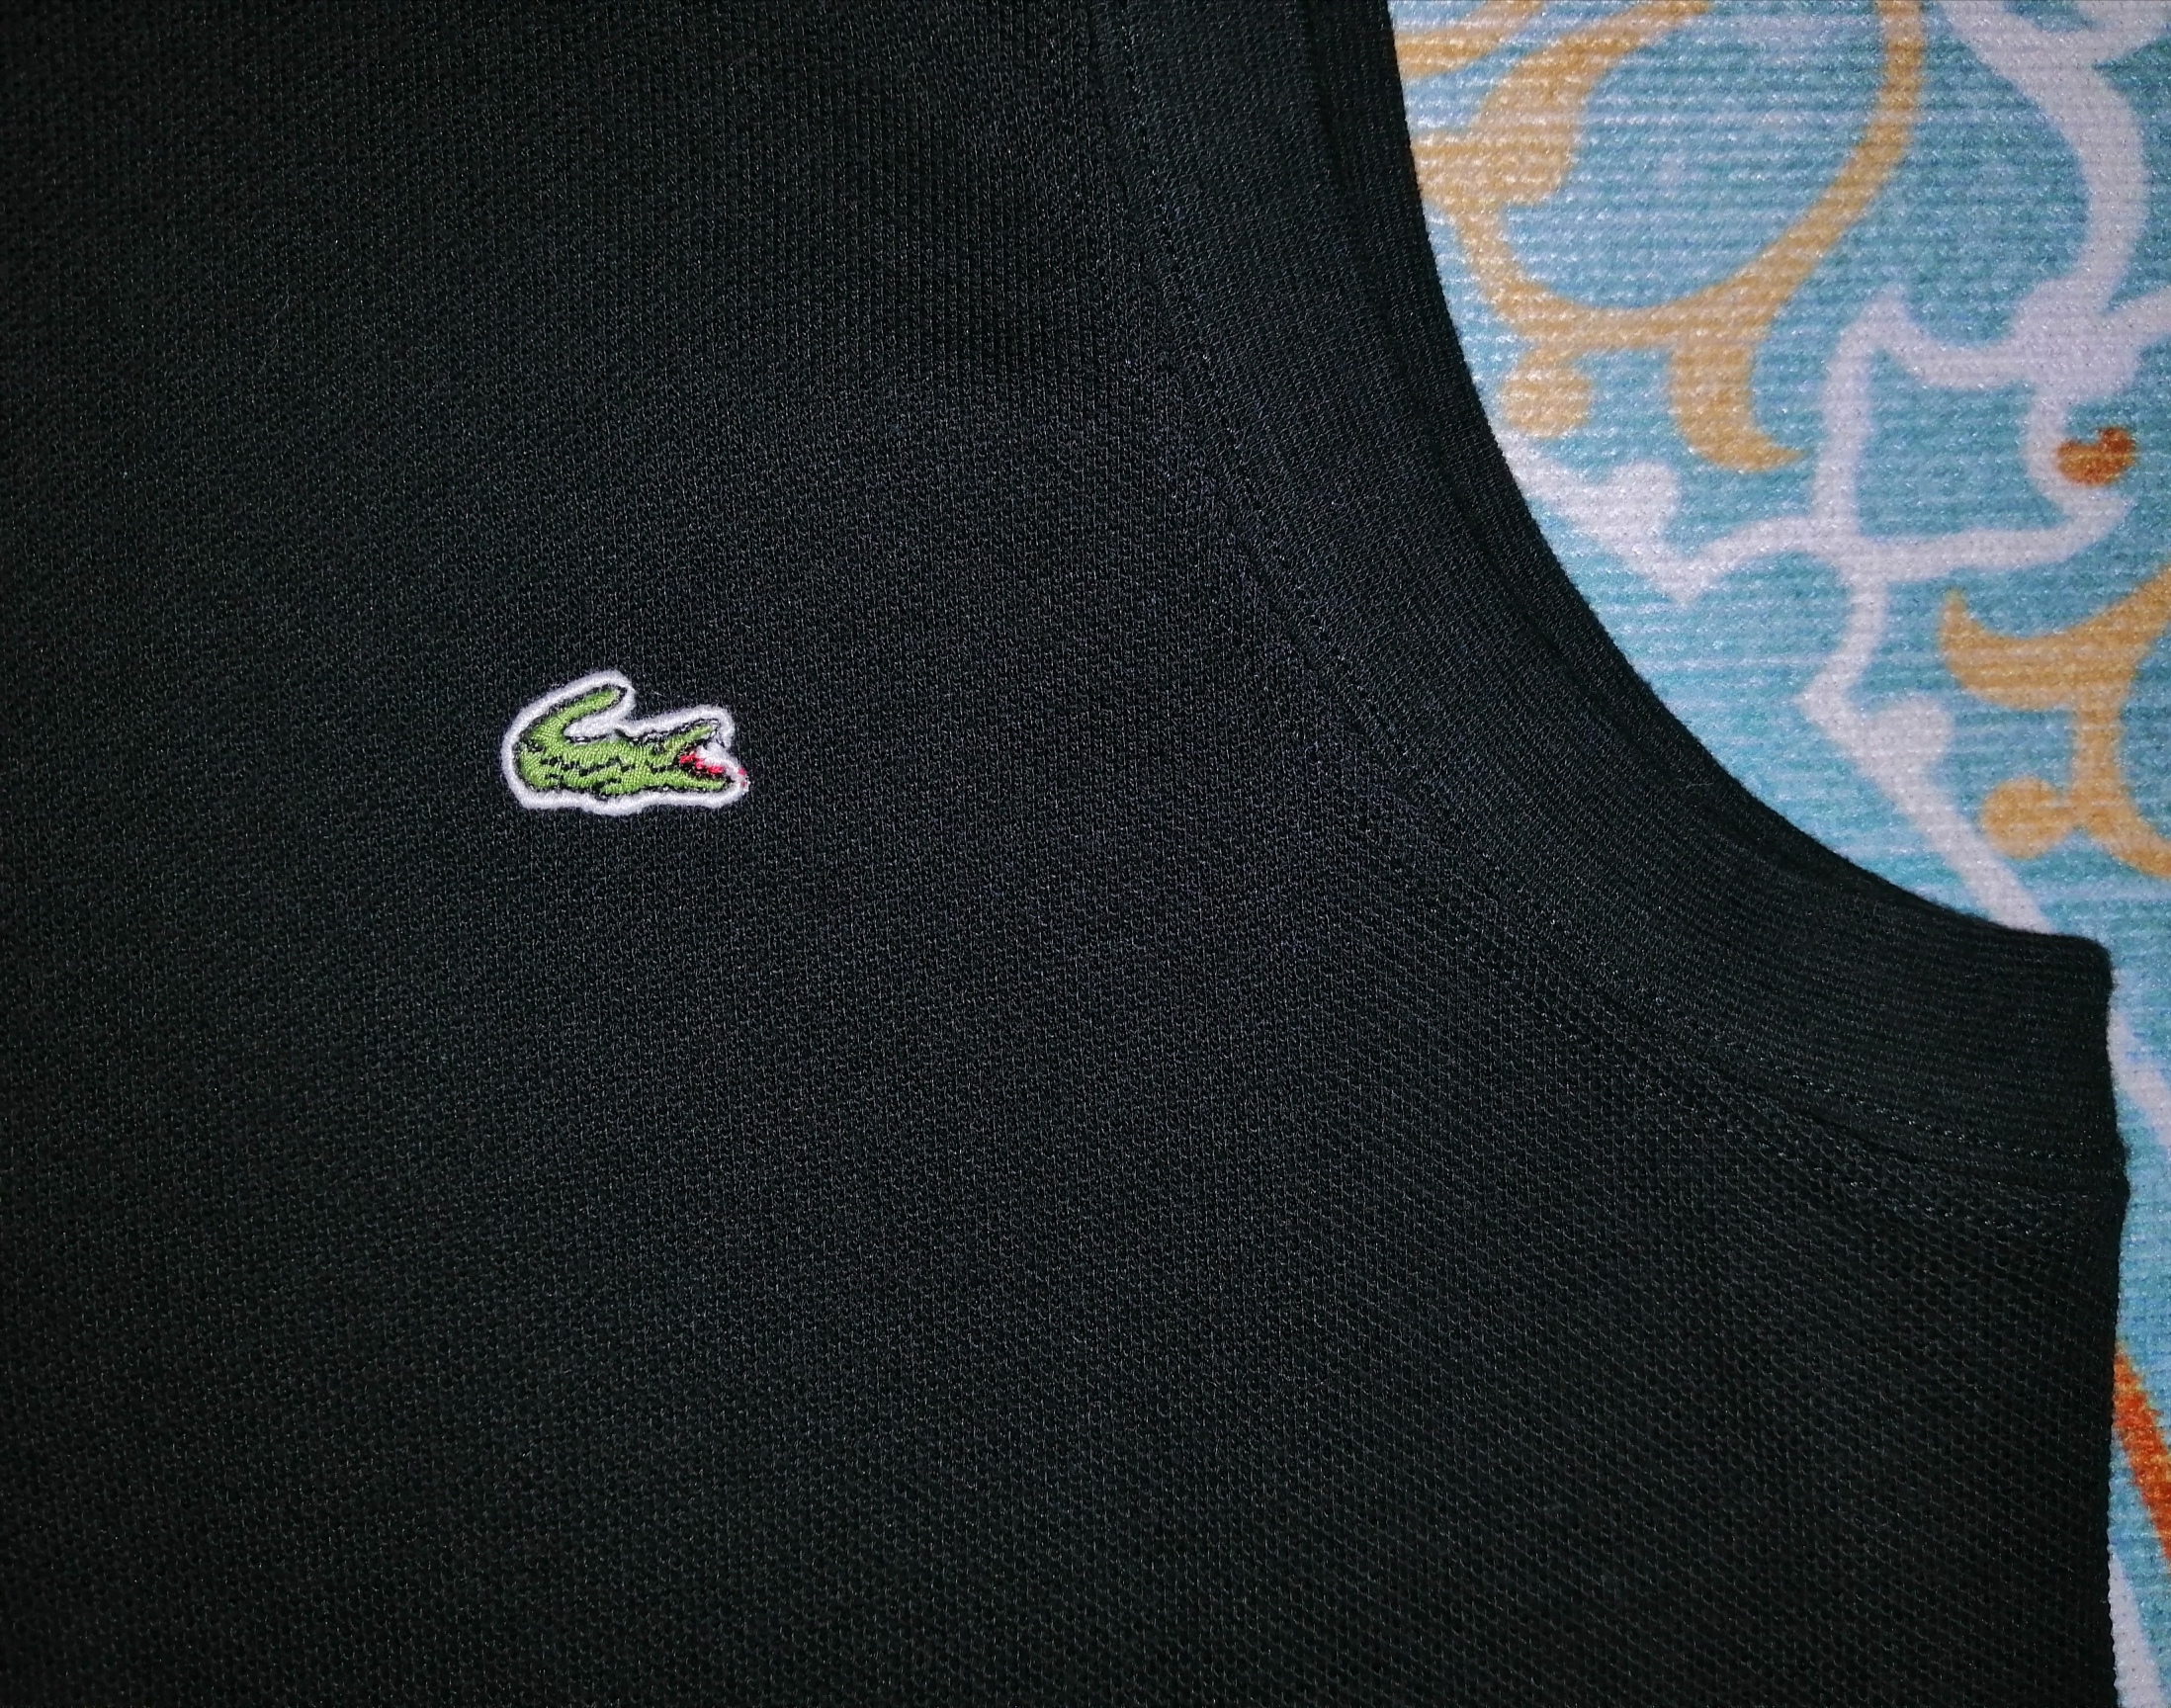 LACOSTE SLEEVELES POLO SHIRT MADE IN JAPAN - 7